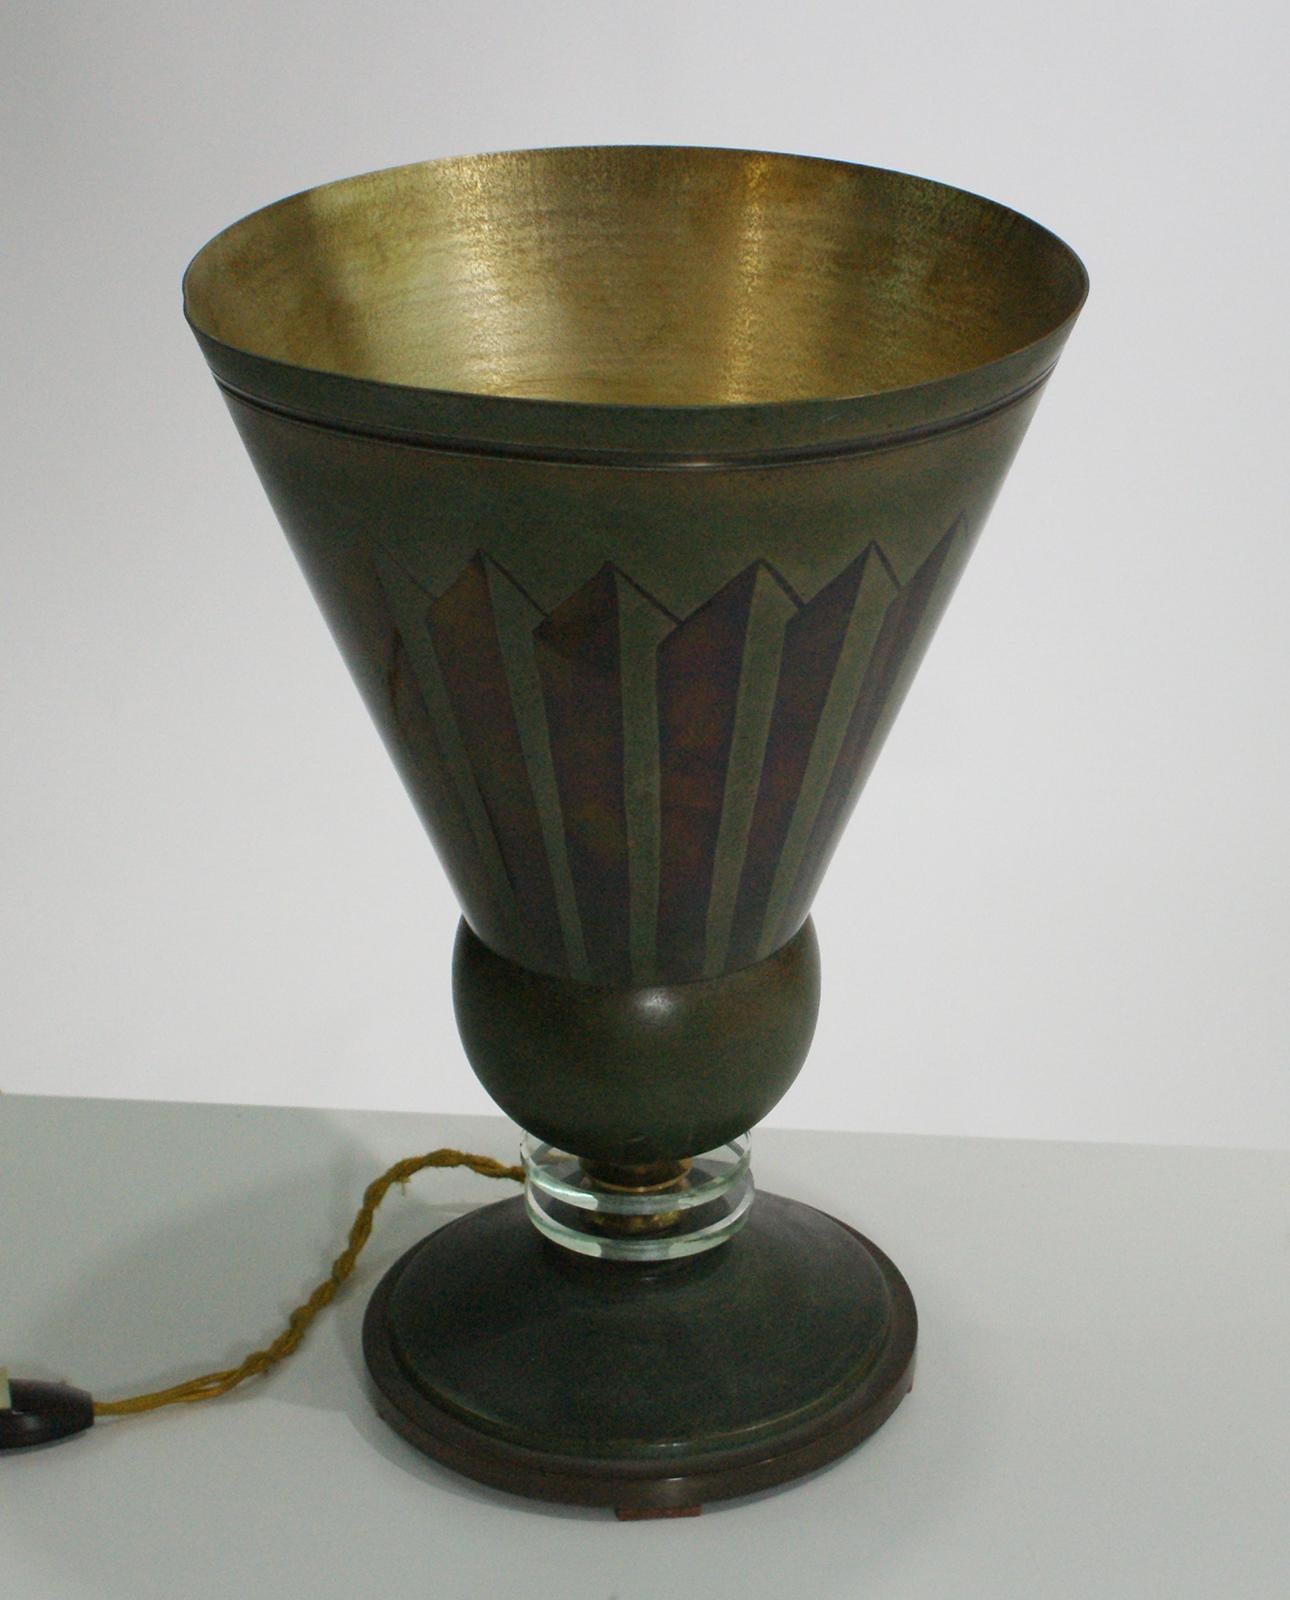 French Art Deco torchiere table lamp edited by Edmond Etling, France, 1930
in brass with a geometric design in two green tones and inside in brass color.
Bibliography: Le Luminaire, procédés d’éclairages nouveaux, Guillaume Janneau, Editor: